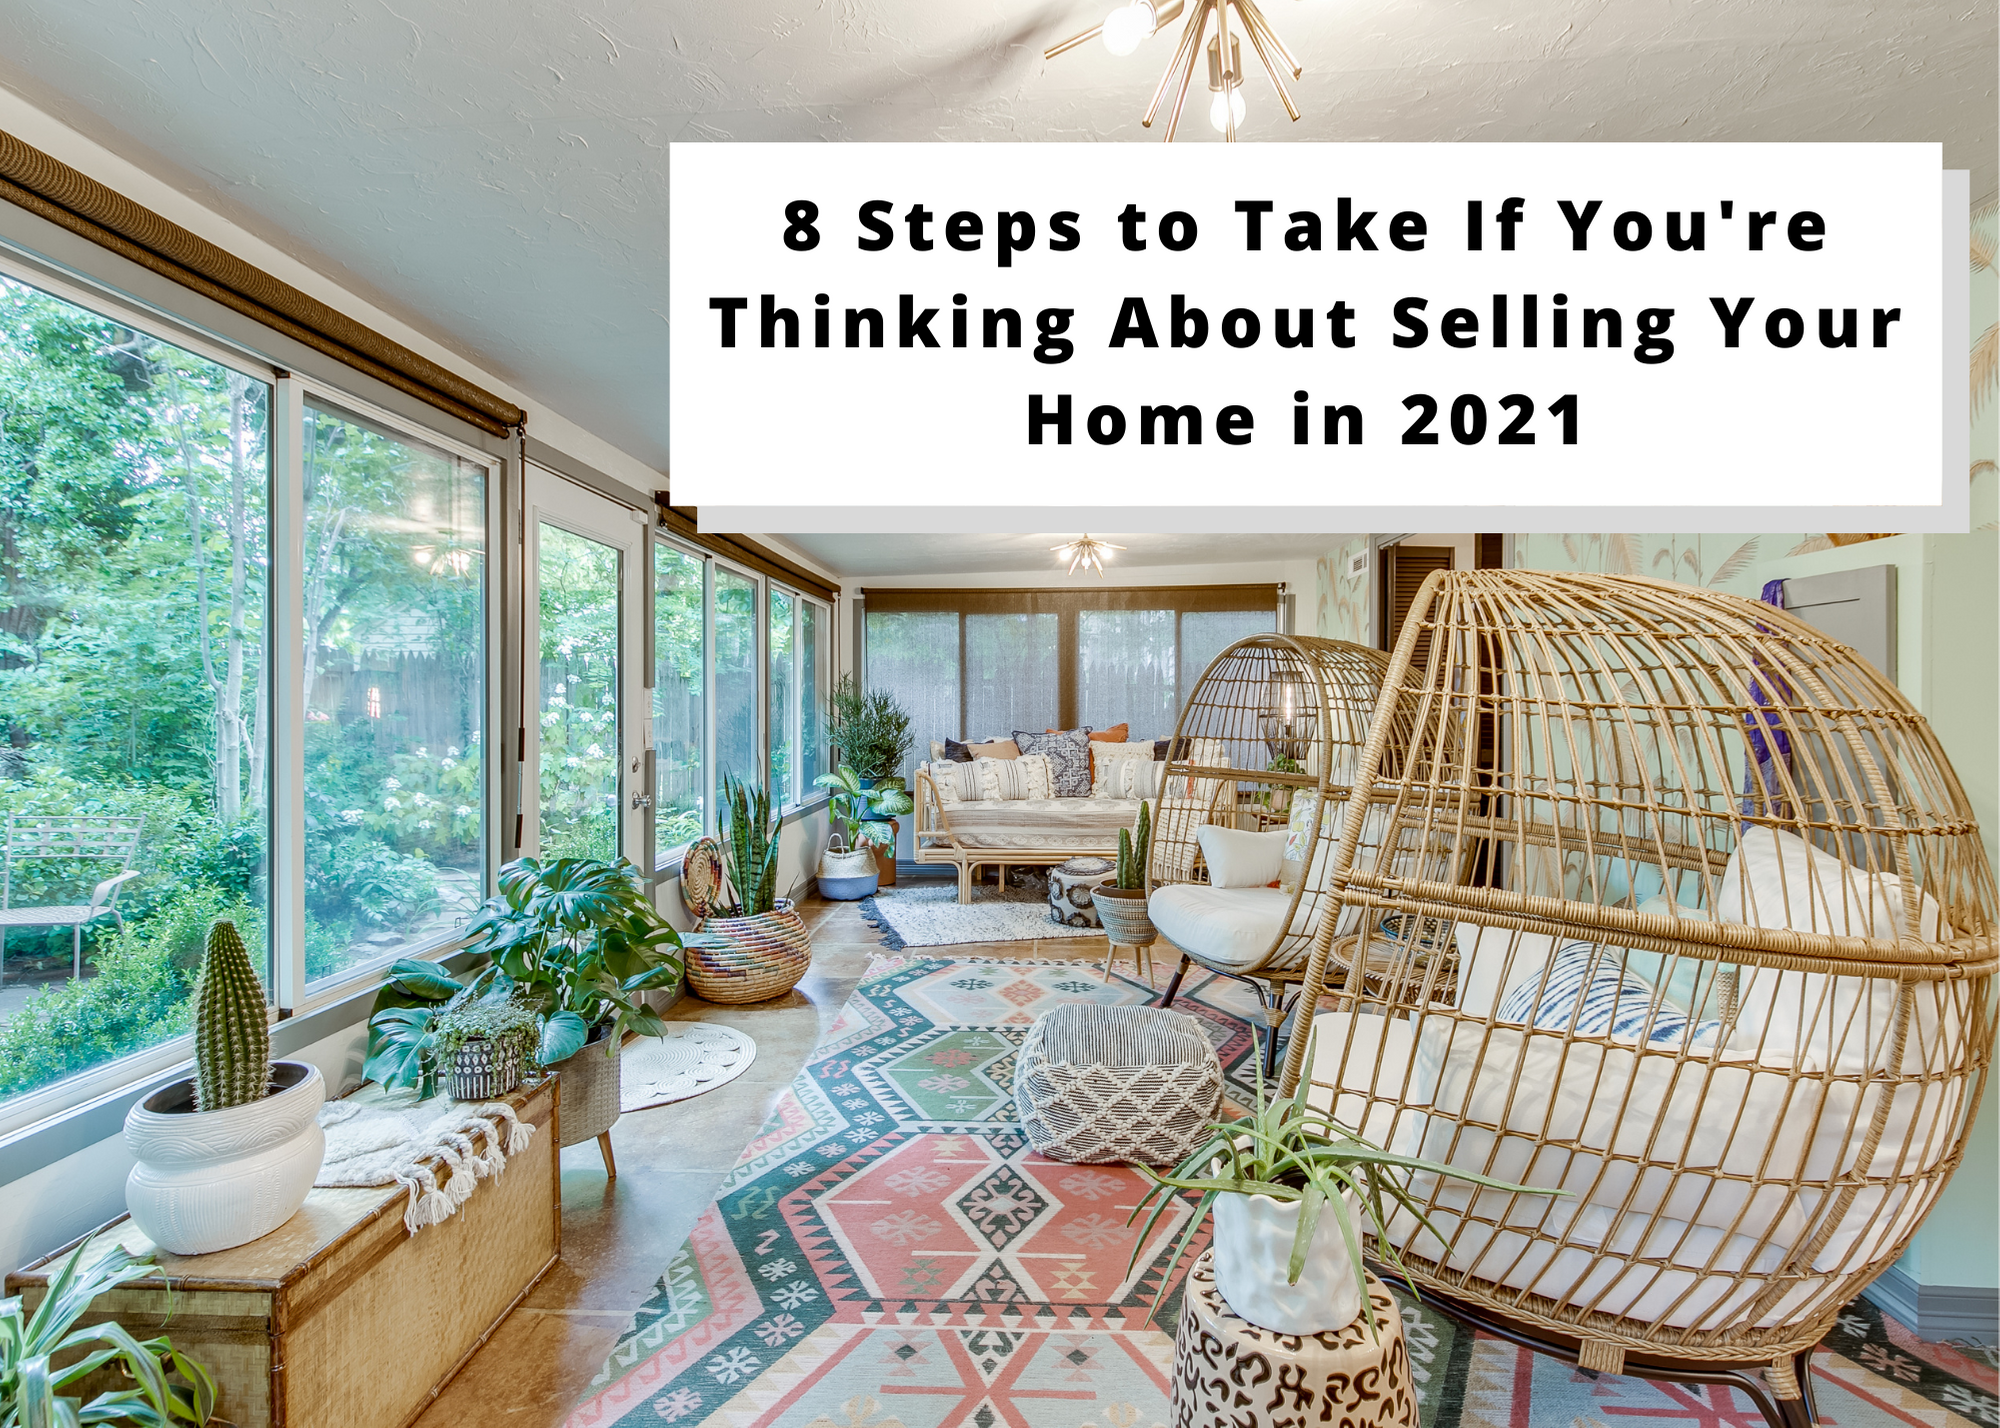 8 Steps to Take If You're Thinking About Selling Your Home in 2021